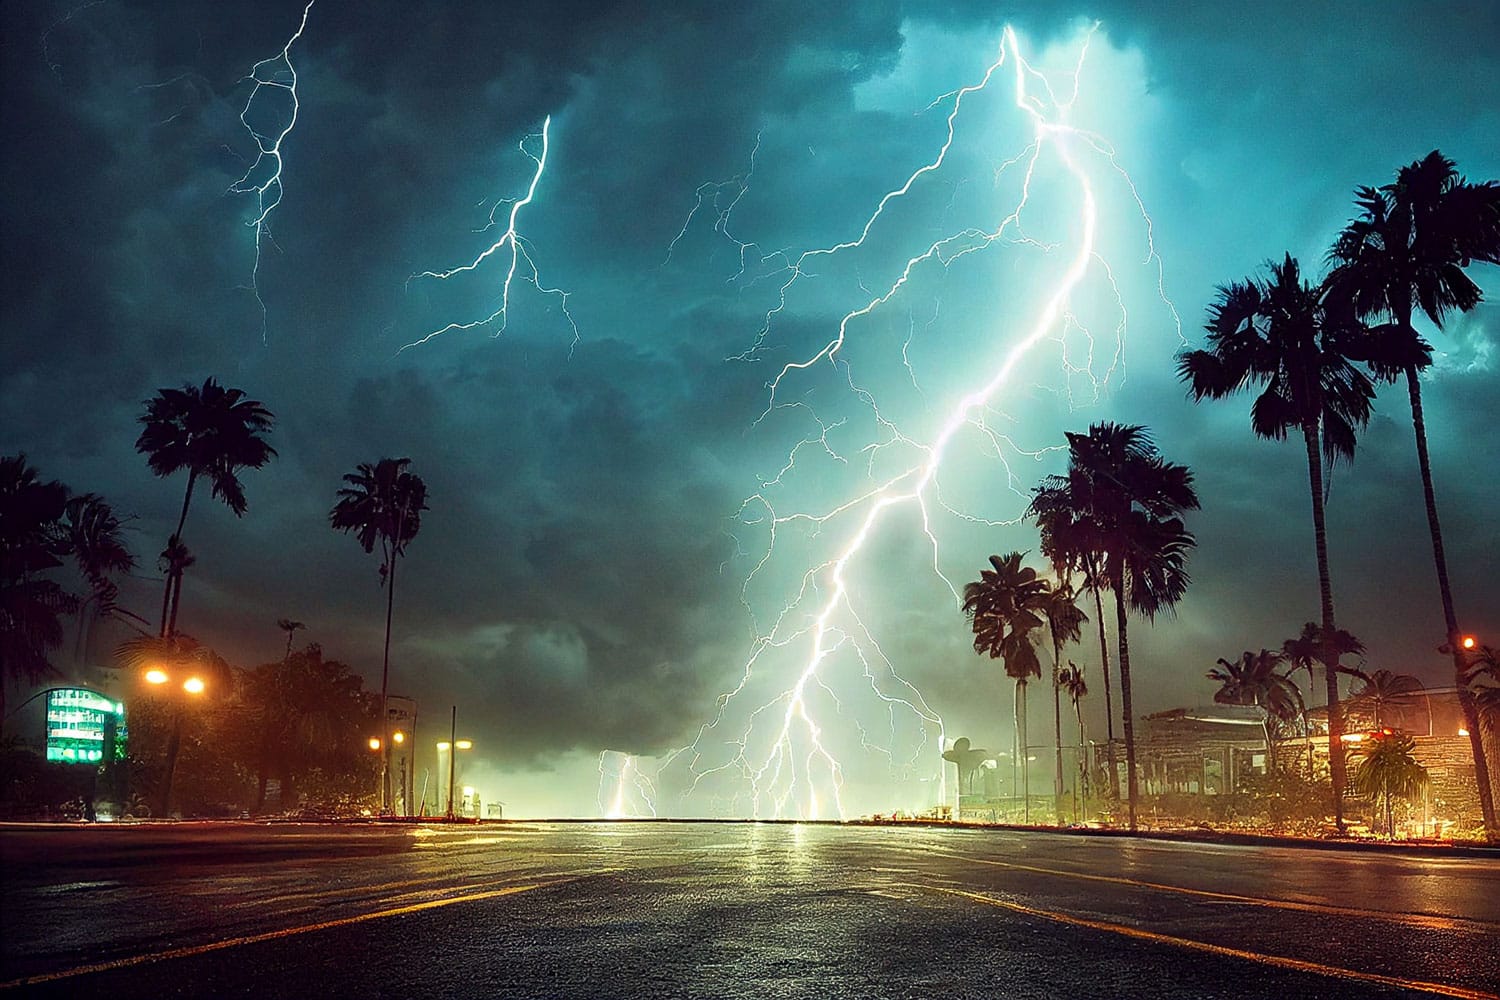 Lightning in the sky over a city with palm trees.